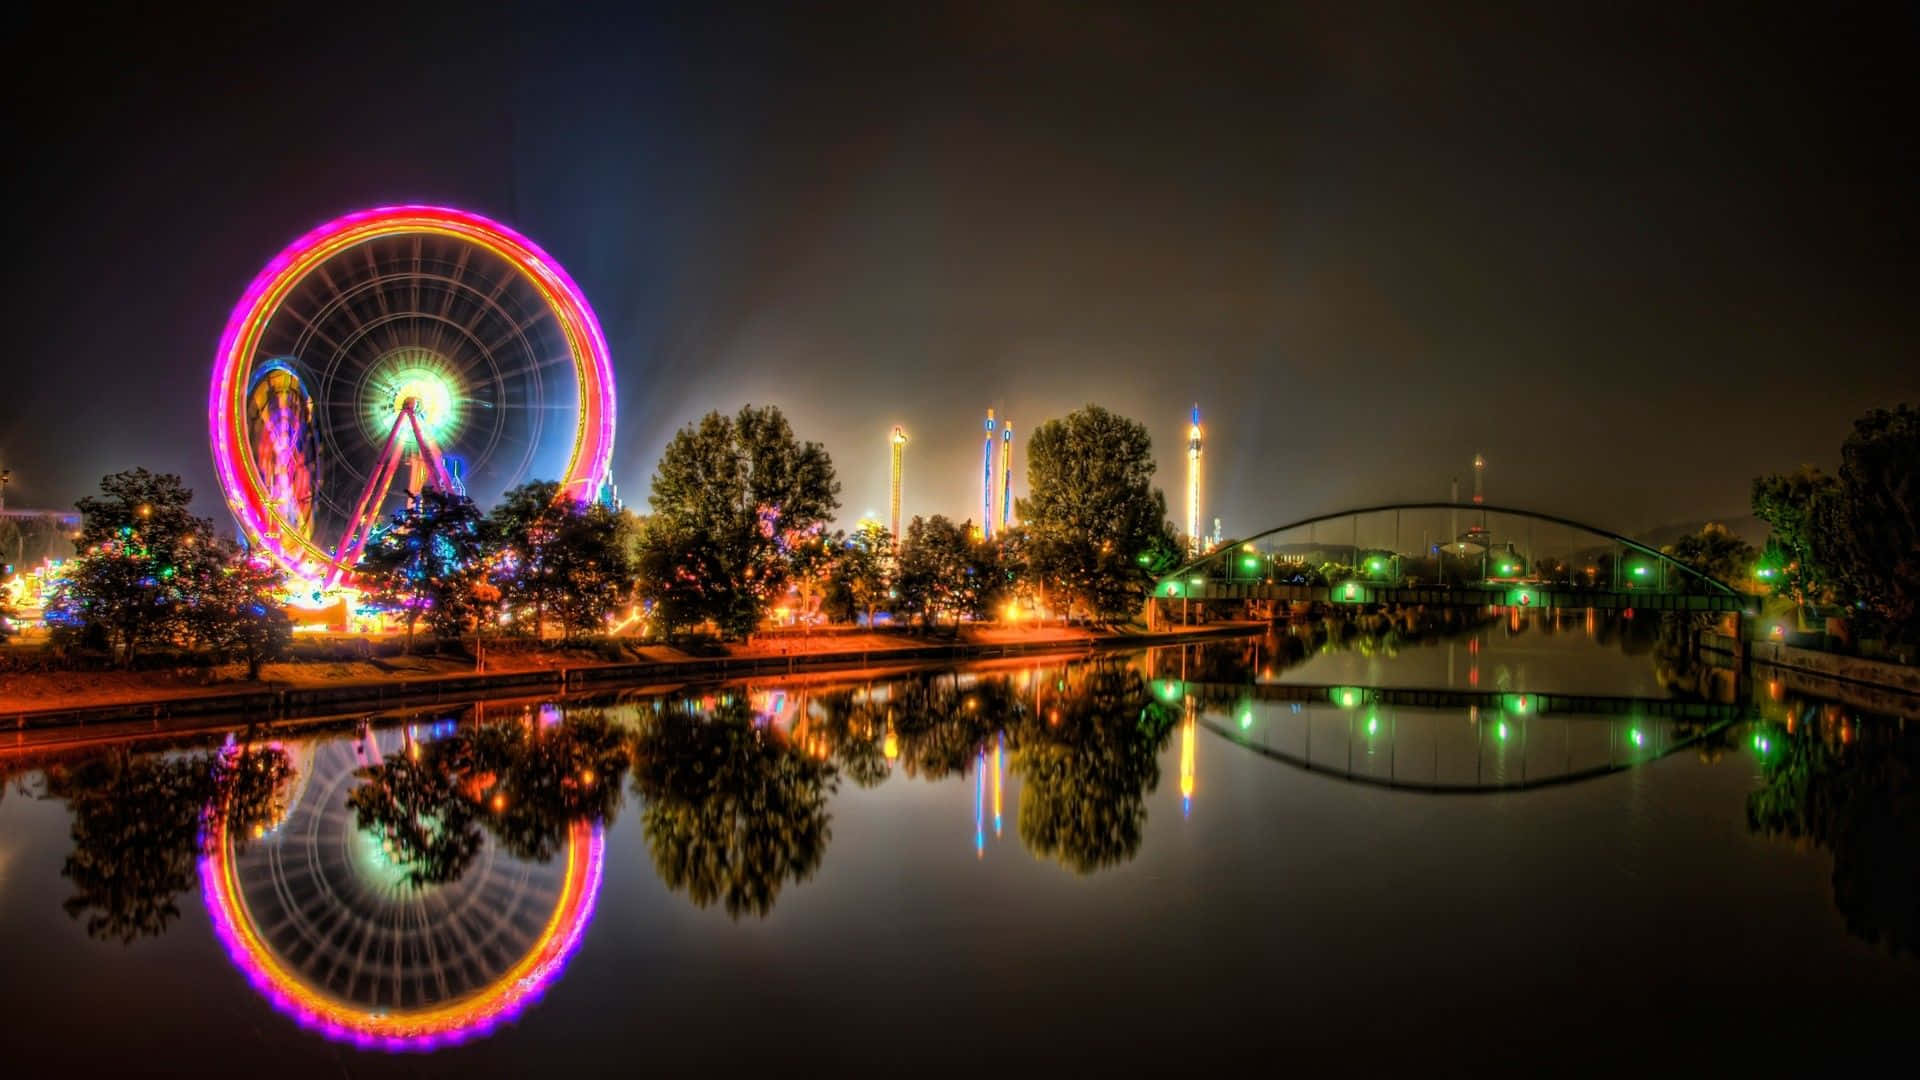 Ferris Wheel And Lights Reflect In The Water